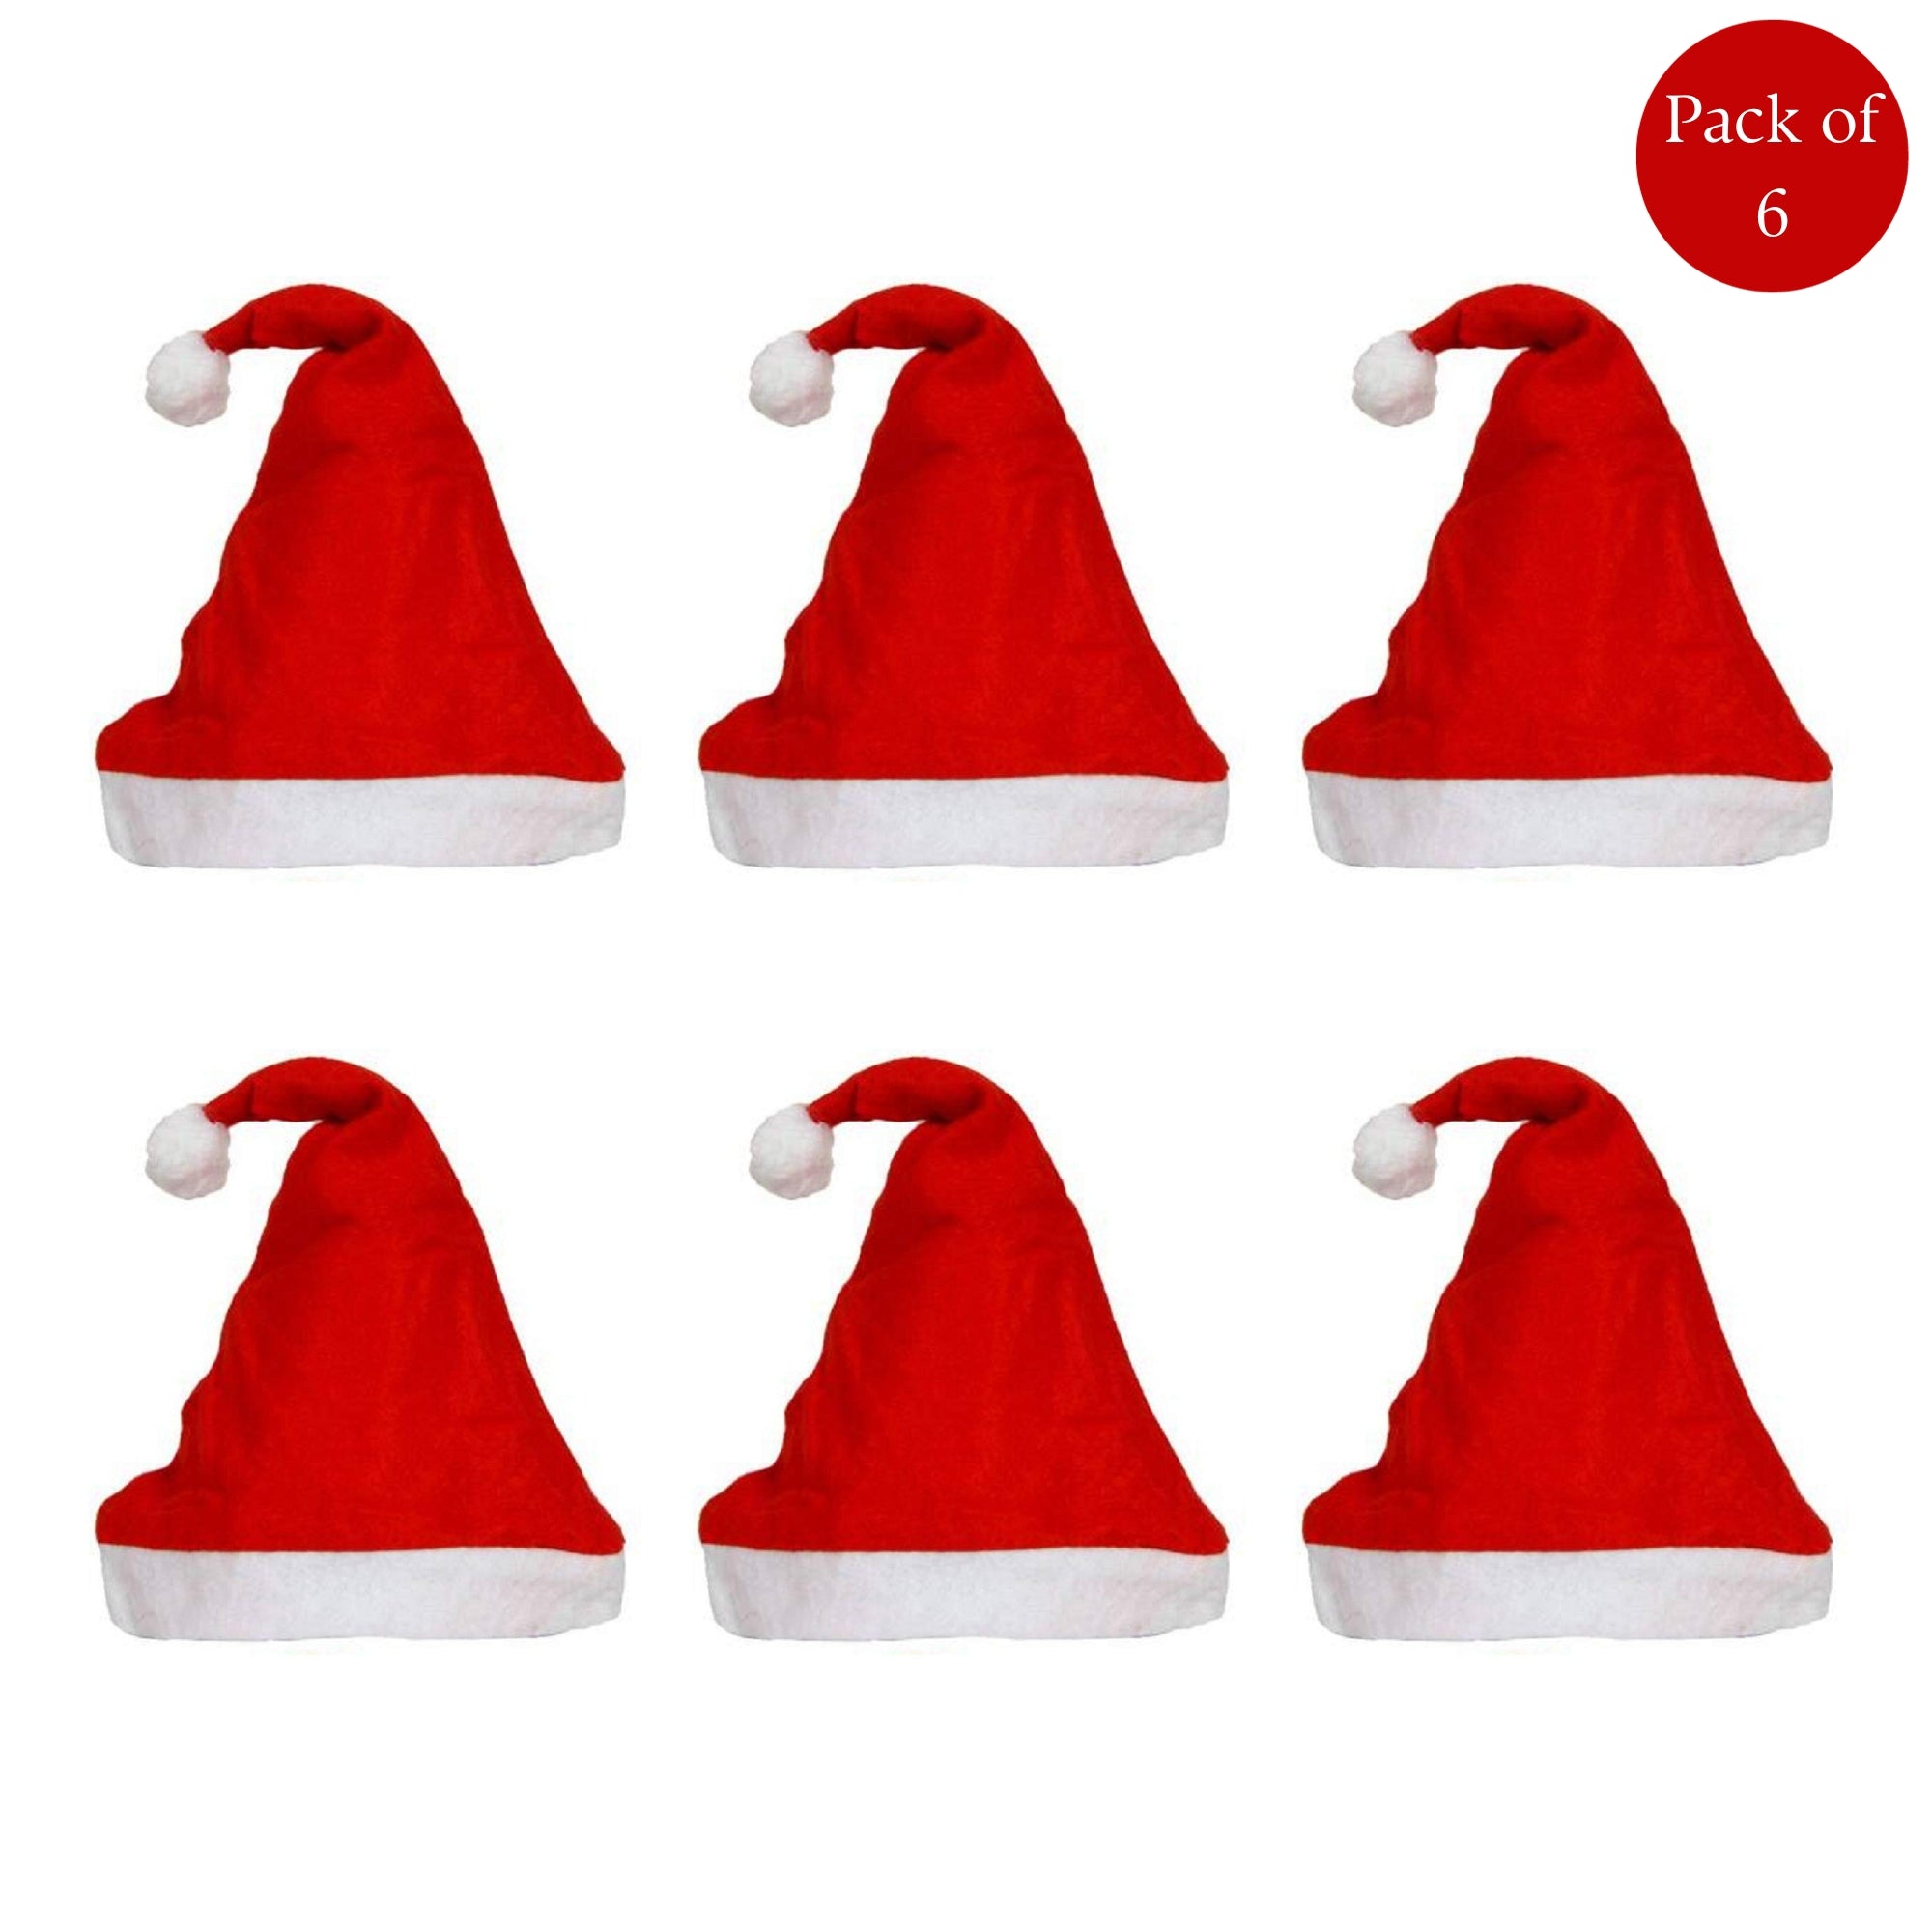 eCraftIndia Red and White Merry Christmas Hats, Santa Claus Caps for kids and Adults - Free Size XMAS Caps, Santa Claus Hats for Christmas, New Year, Festive Holiday Party (Set of 6) 1